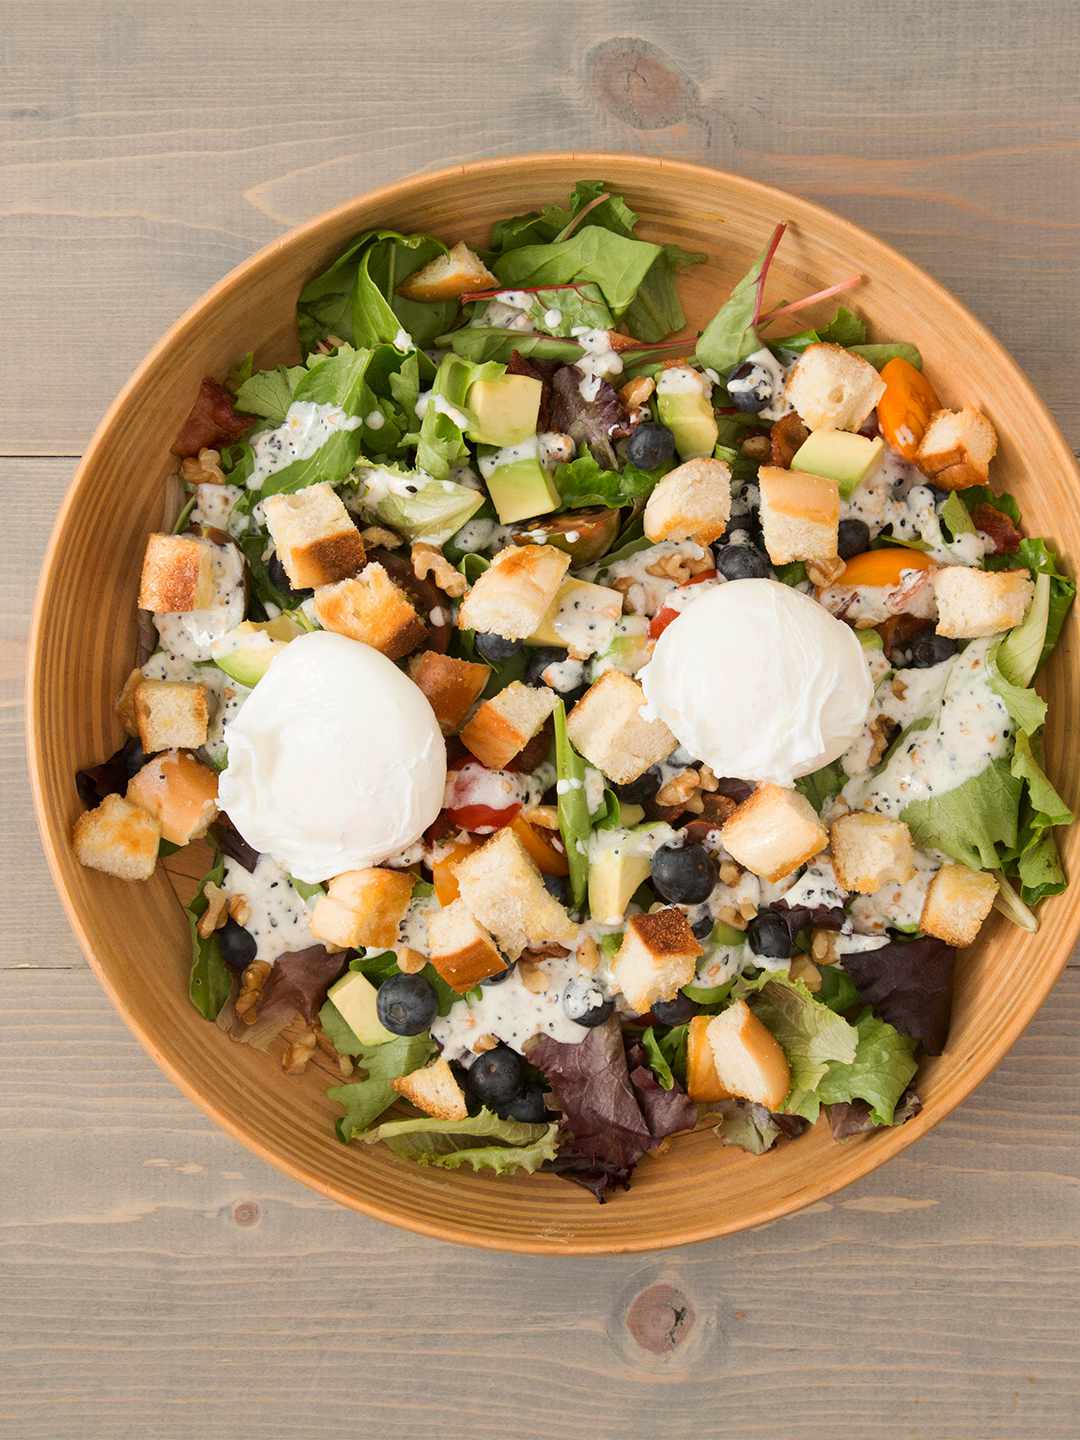 Breakfast Salad with mozzarella cheese balls croutons and berries